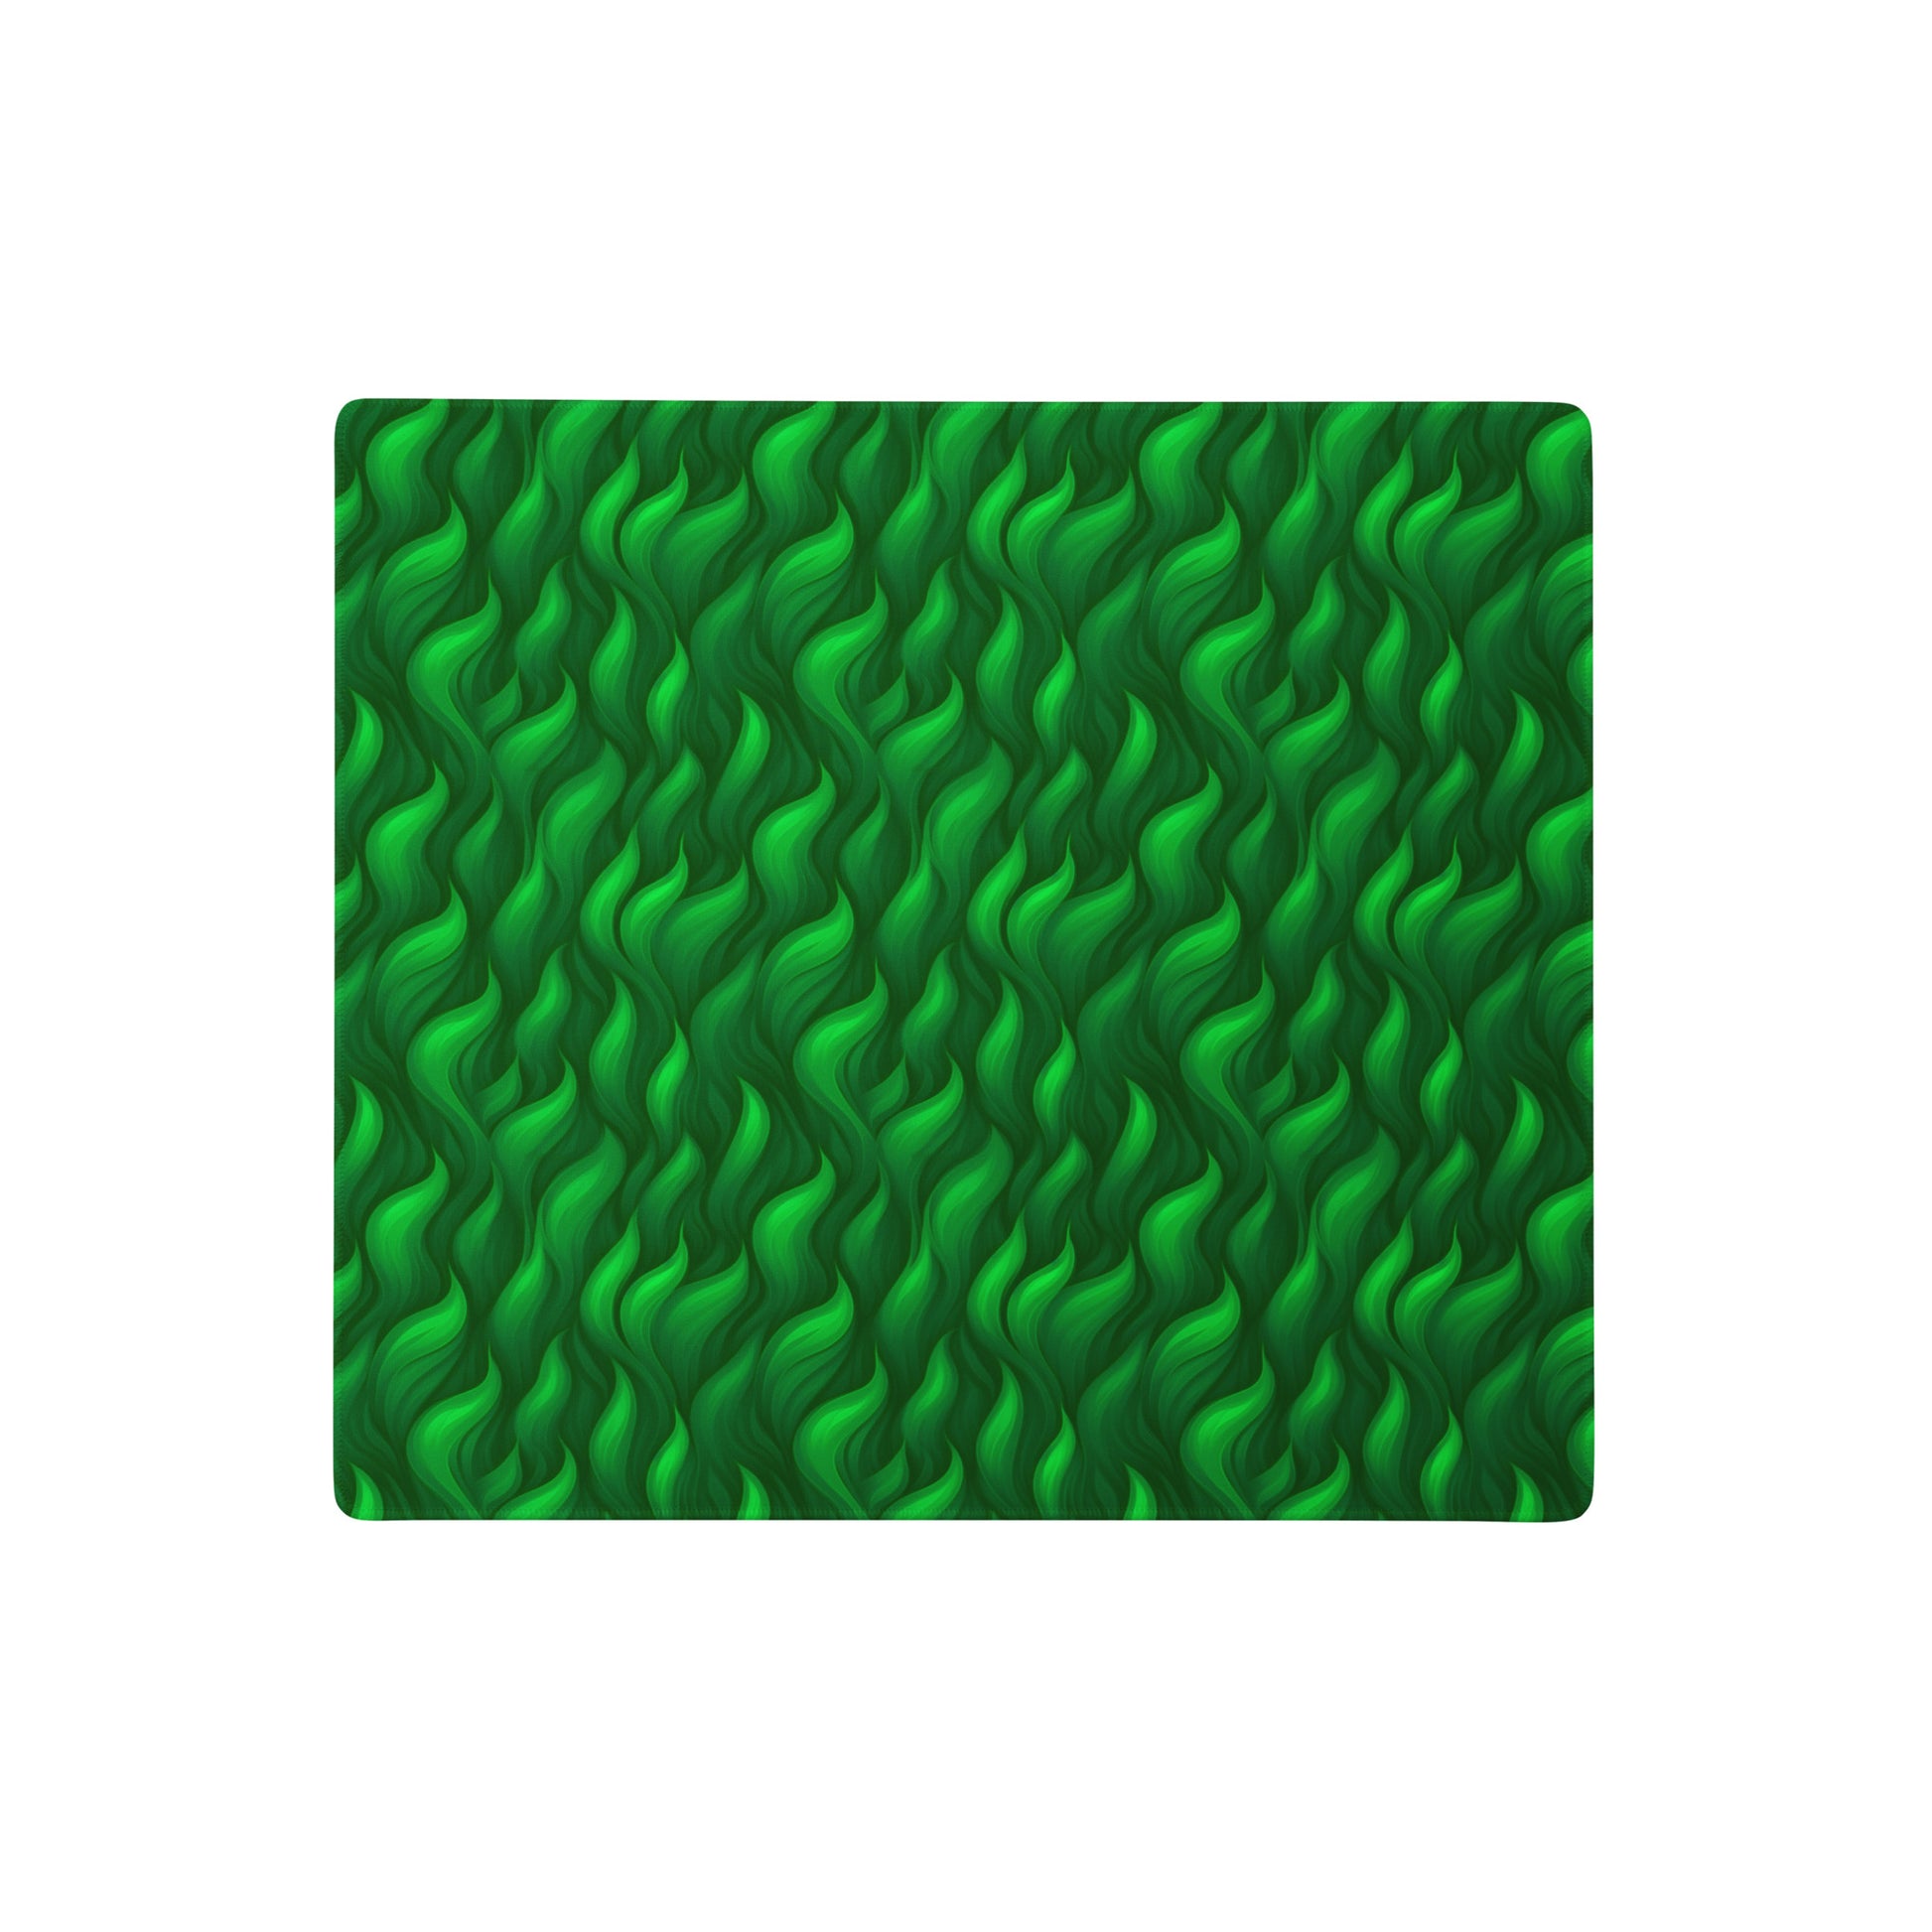 A 18" x 16" desk pad with a wavy flame pattern on it. Green in color.